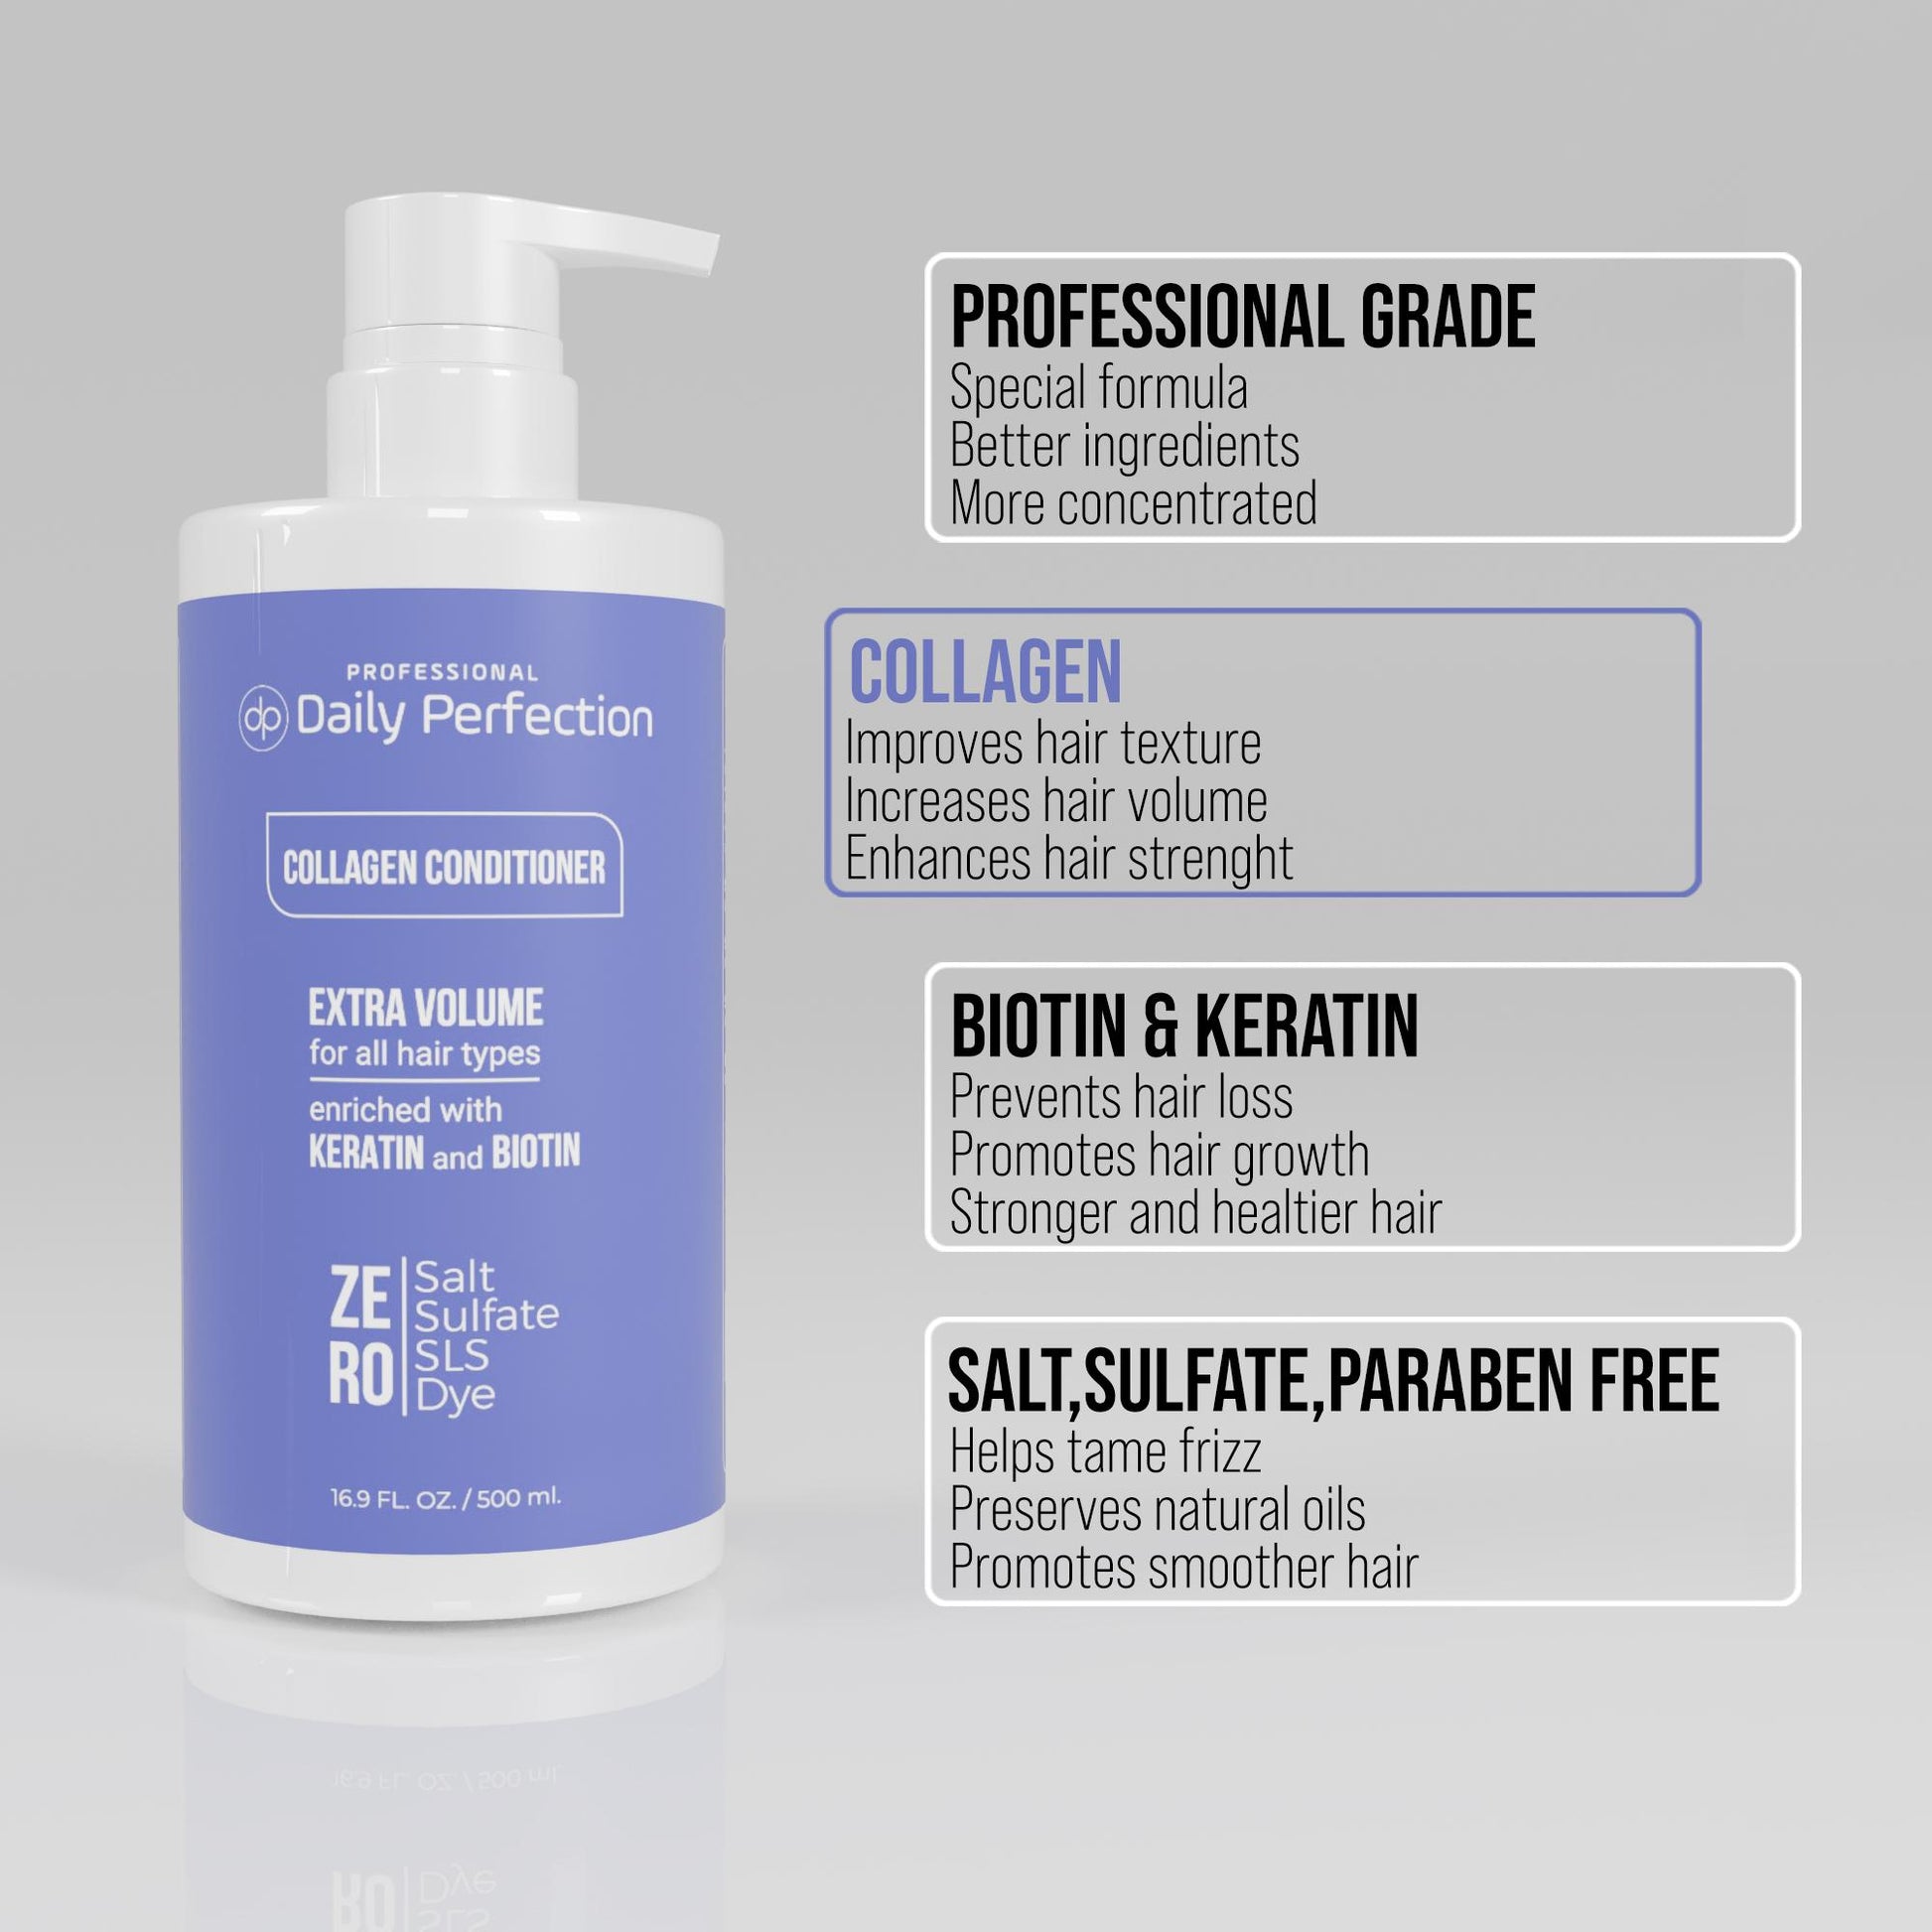 infographic explains the product benefits in four bullet points for Daily Perfection Collagen Conditioner